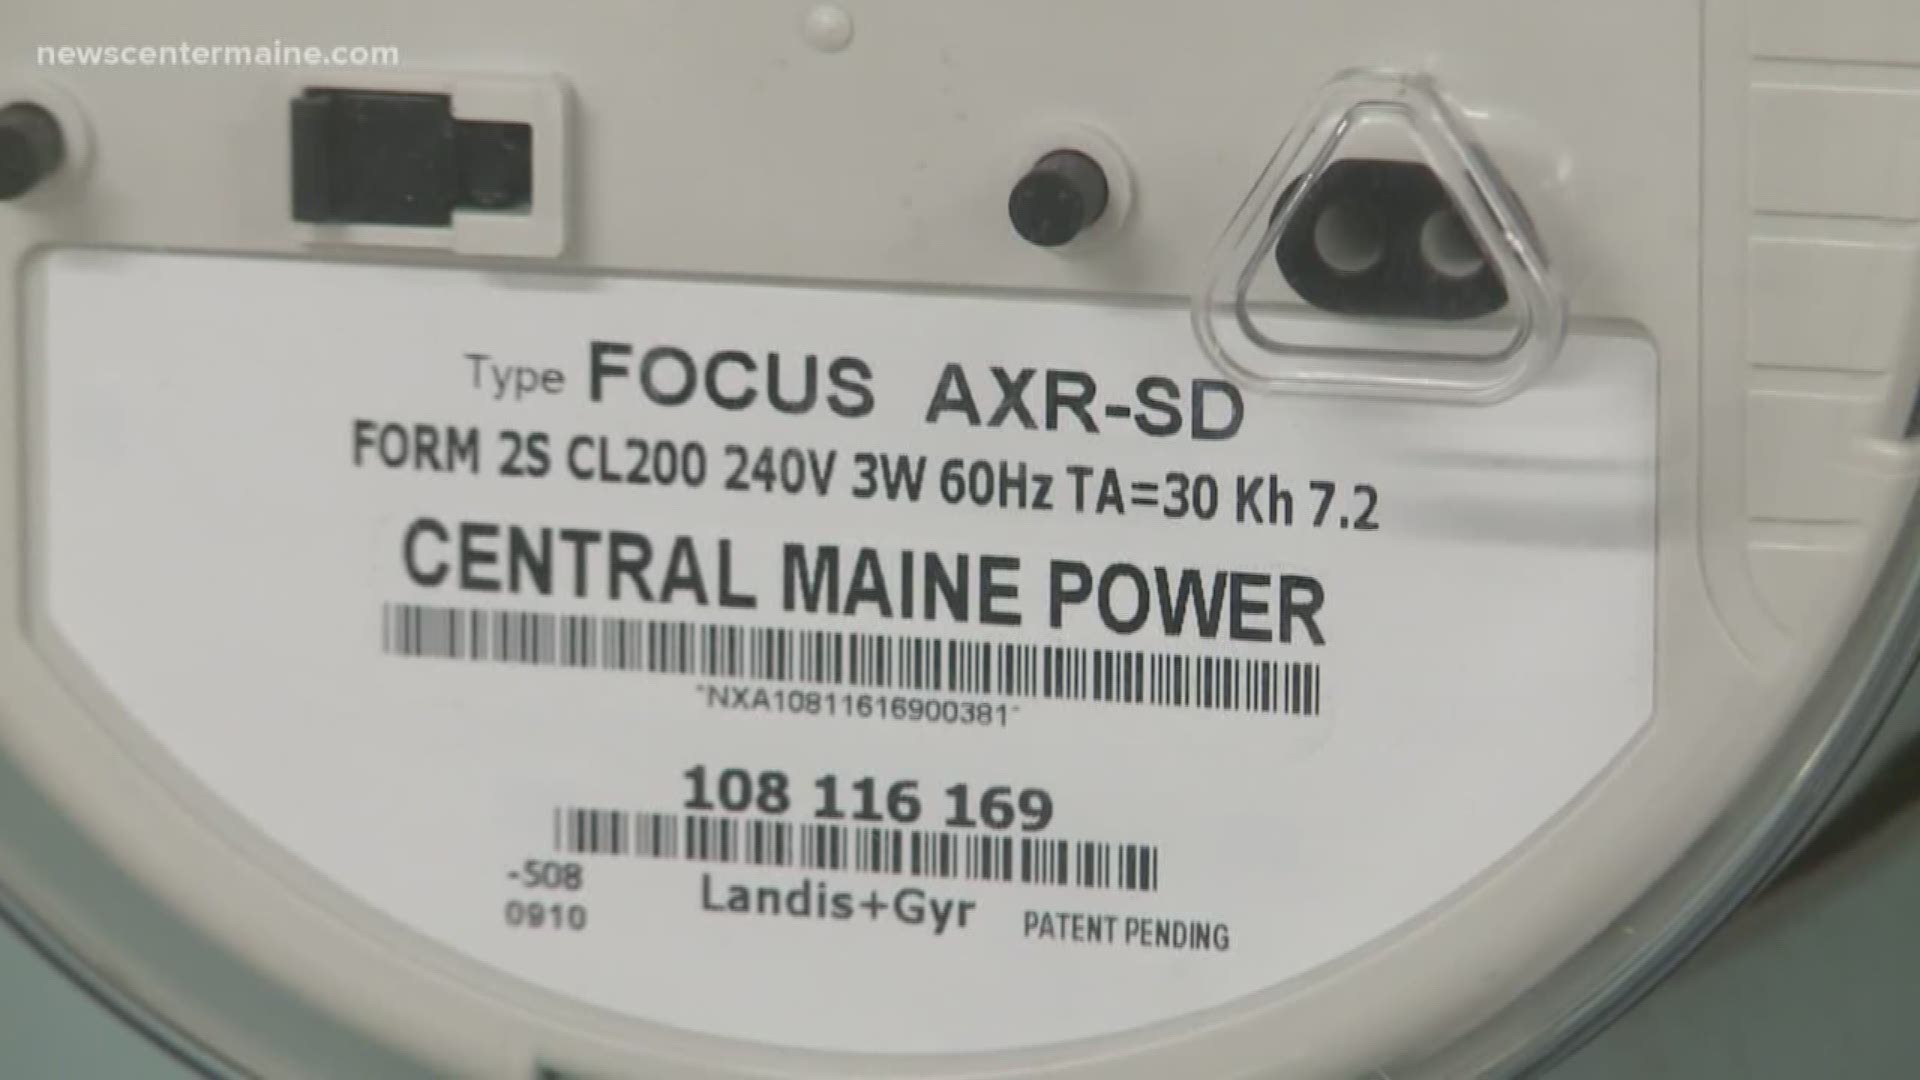 Central Maine Power has given copies of metering and billing information to Maine's Public Advocate, as requested.